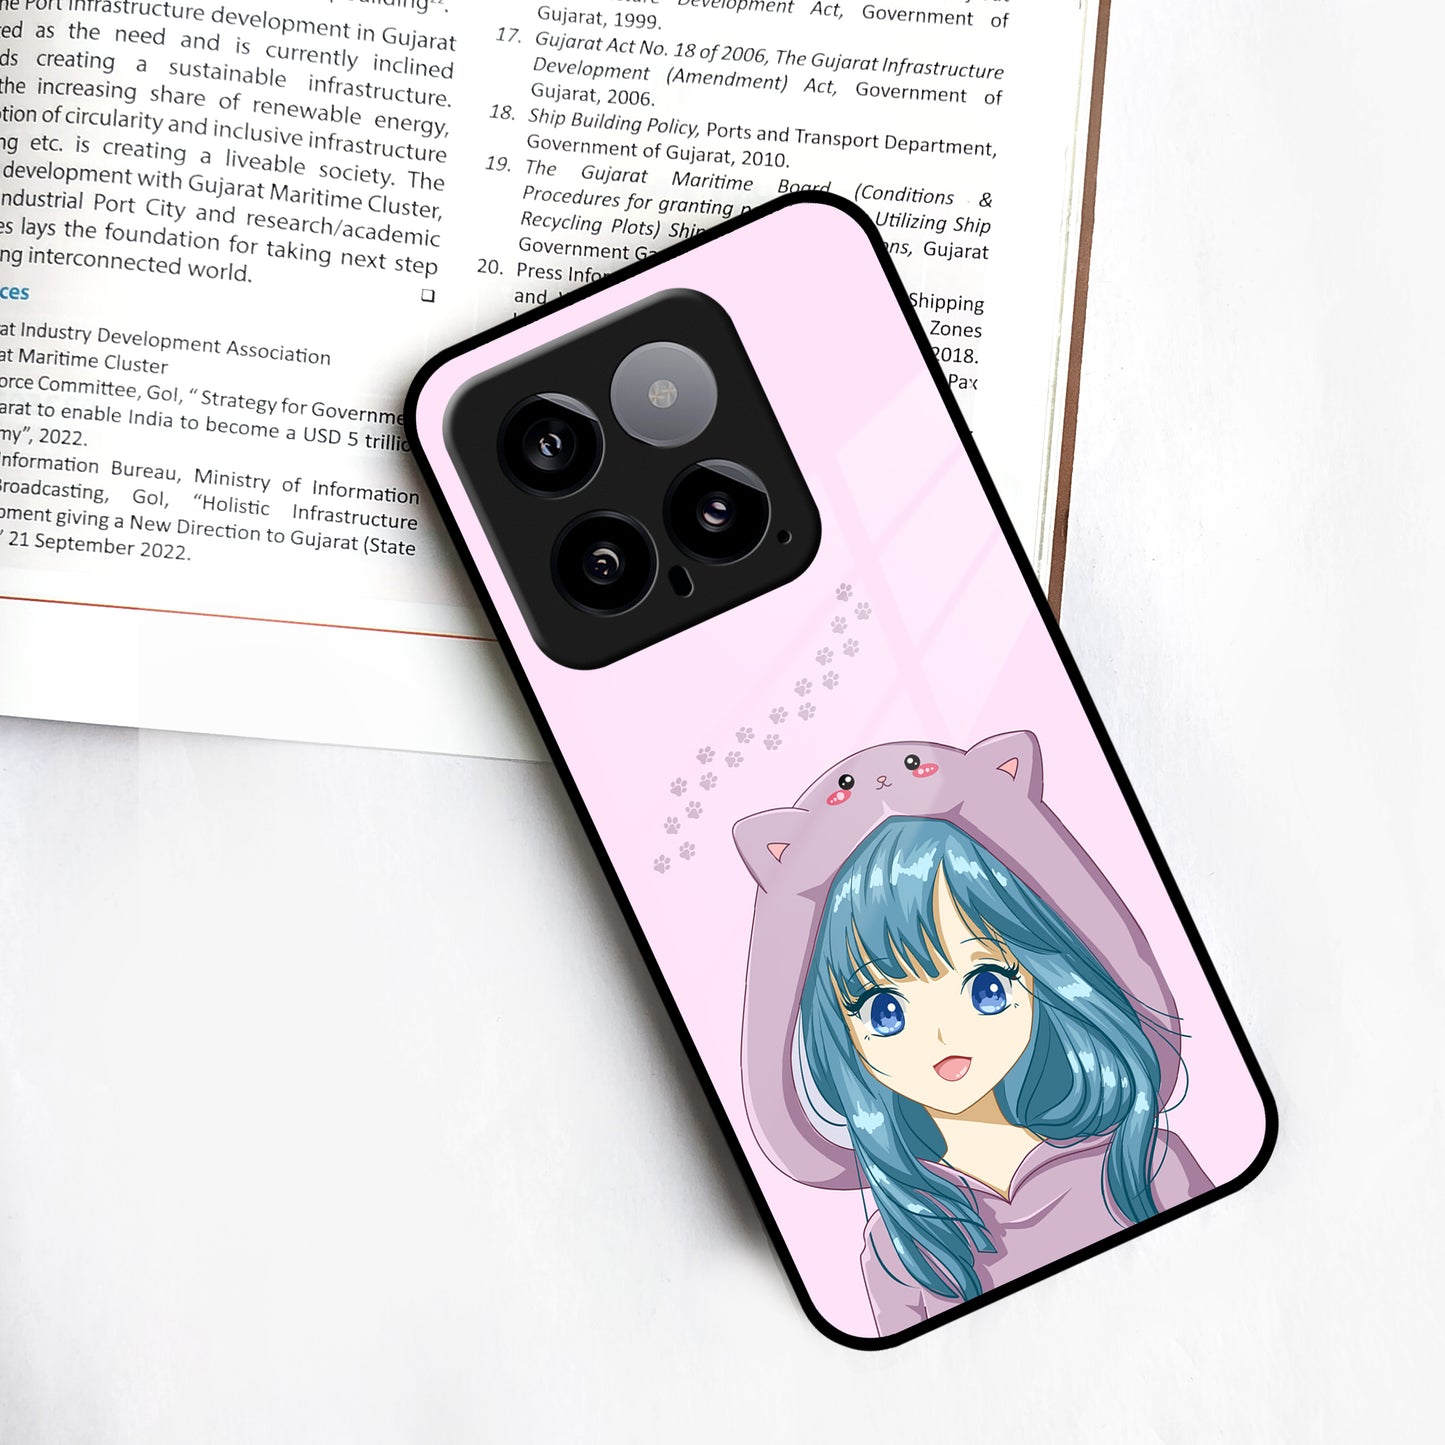 Purple Aesthetic Girl With Cat Phone Glass Case Cover For Redmi/Xiaomi